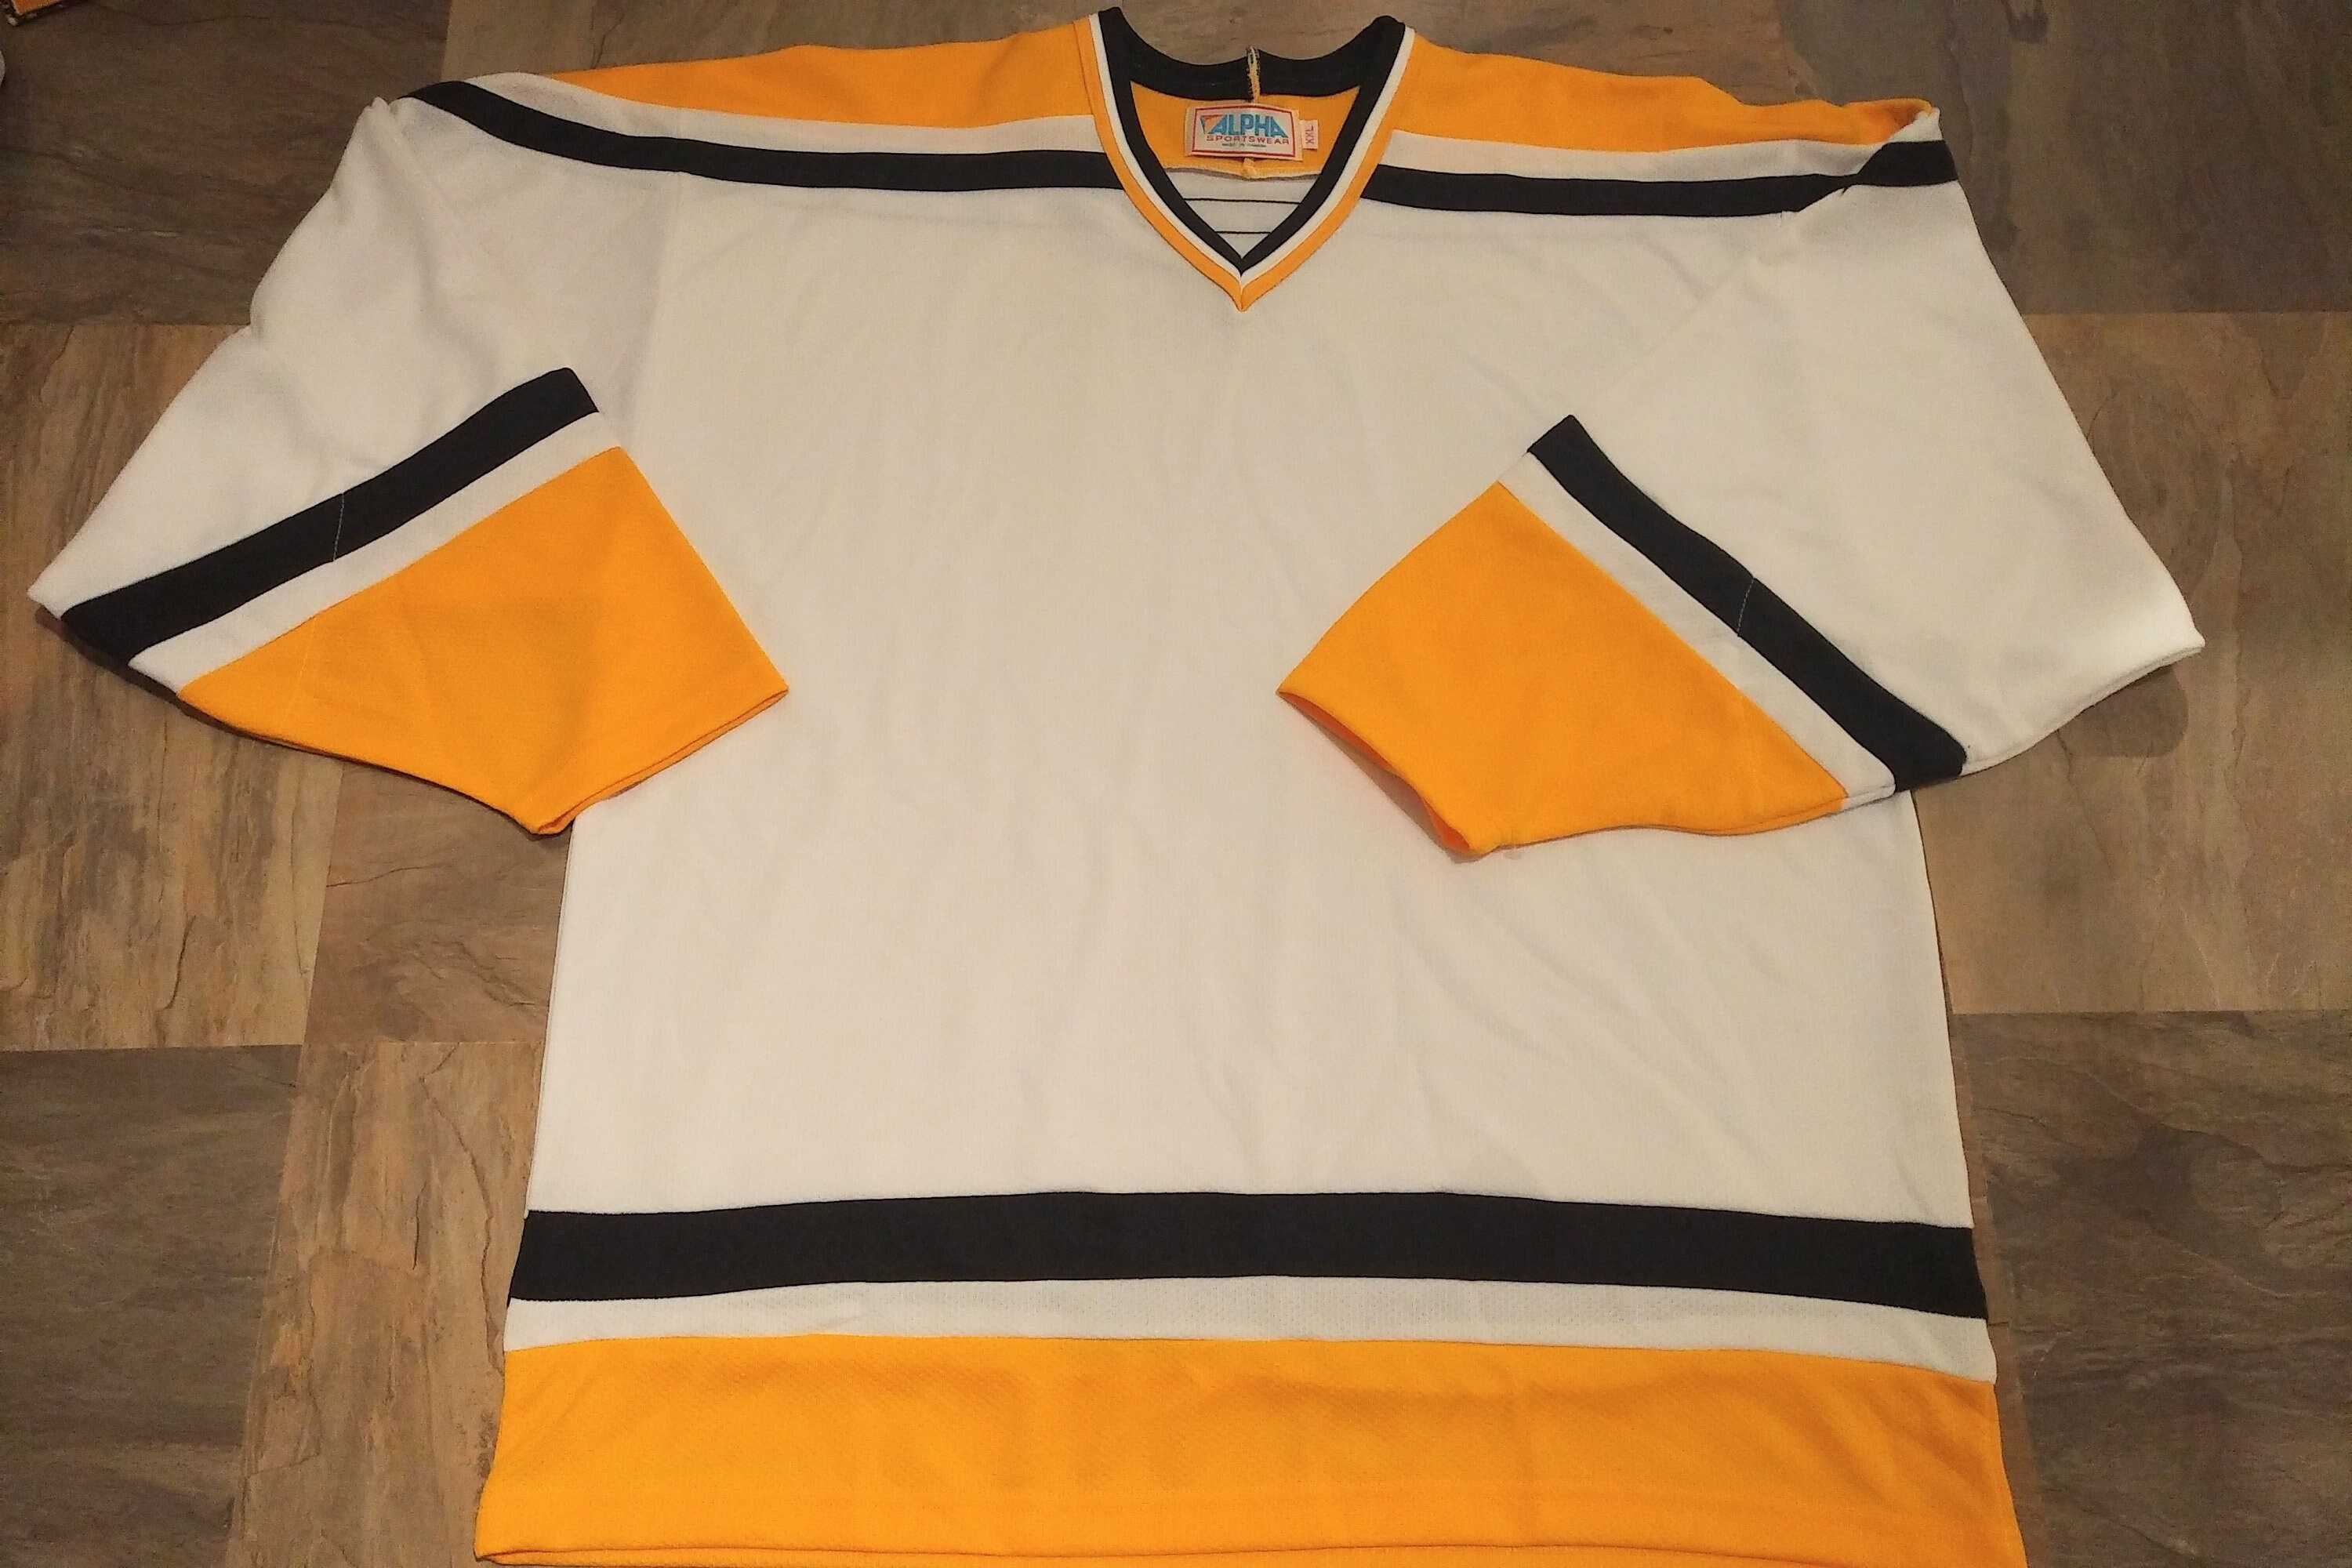 Lostboysvintage Vintage 1990s Pittsburgh Penguins NHL Starter Hockey Jersey / Sportswear / Embroidered / Athleisure / Made in Canada / Streetwear / Eastern